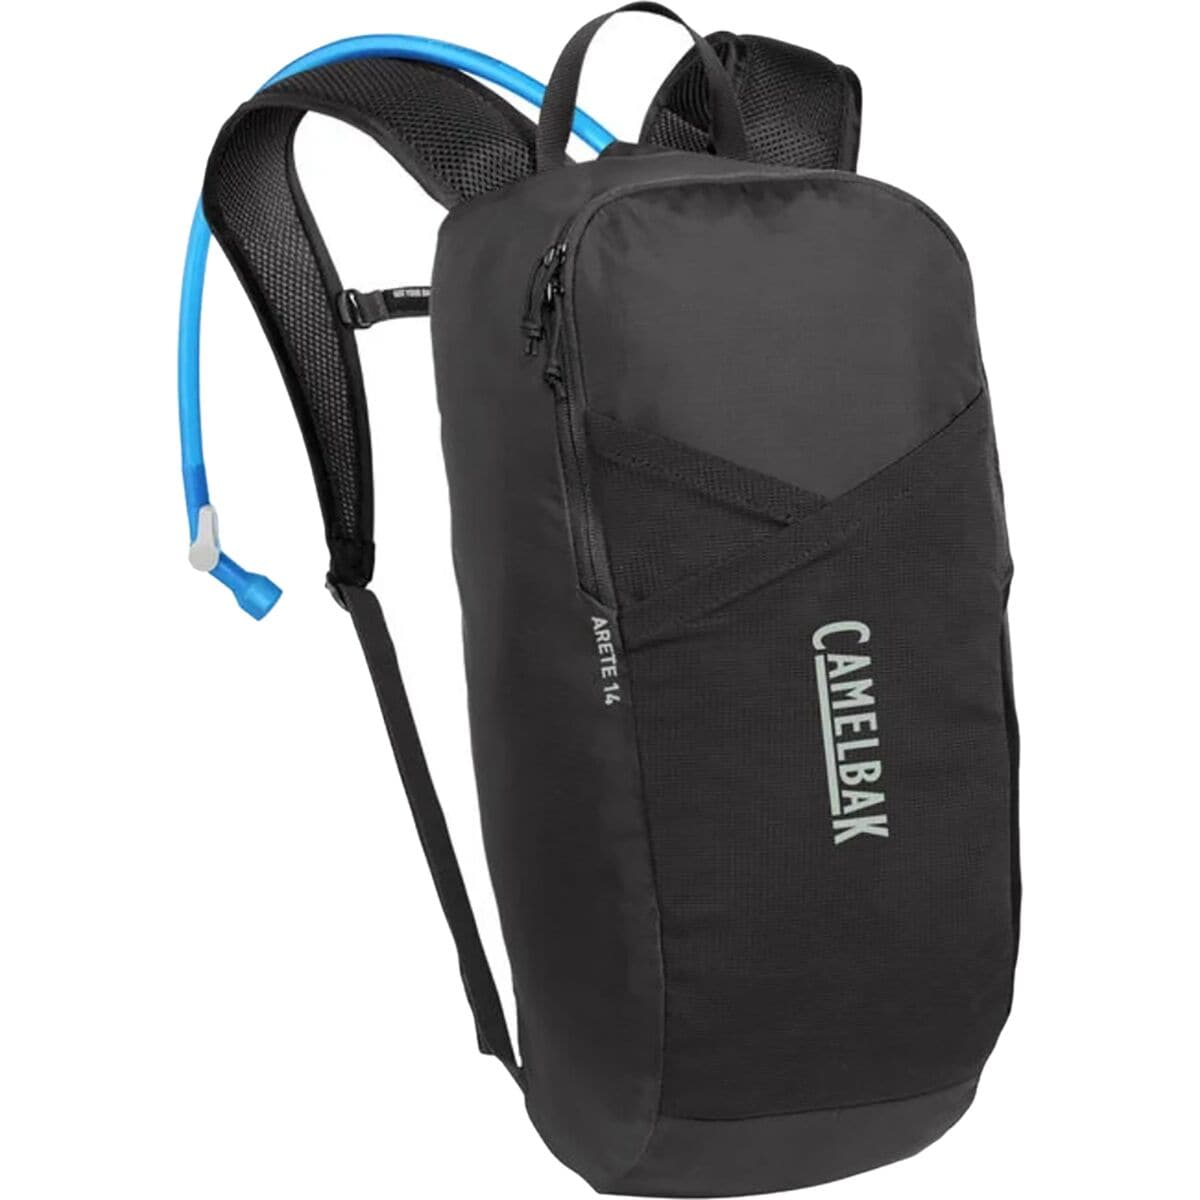 Photos - Backpack CamelBak Arete 14L Hydration Pack 